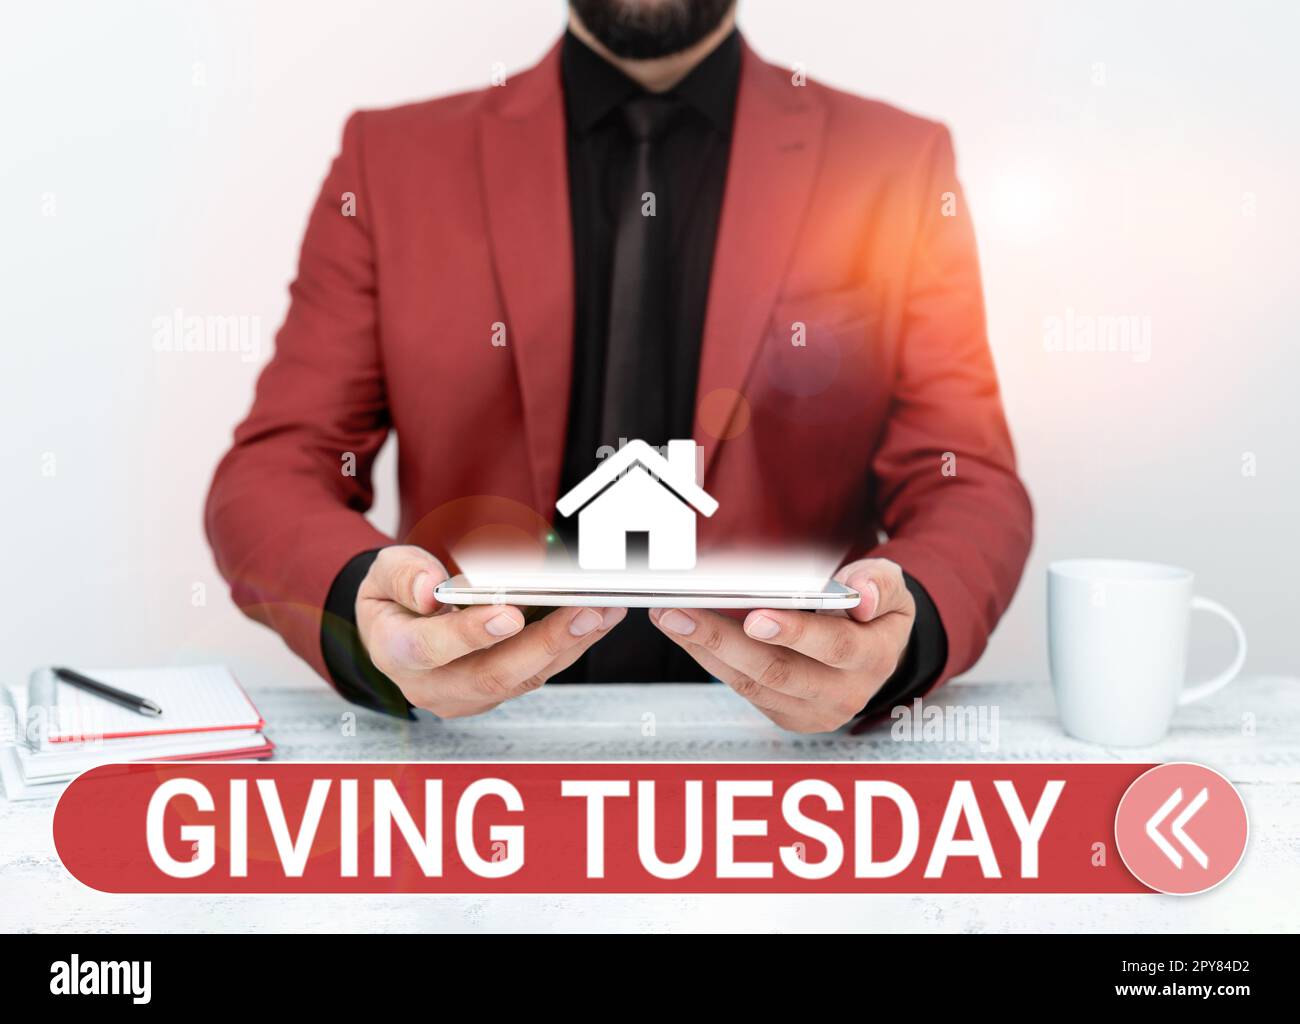 Inspiration showing sign Giving Tuesday. Word Written on international day of charitable giving Hashtag activism Stock Photo